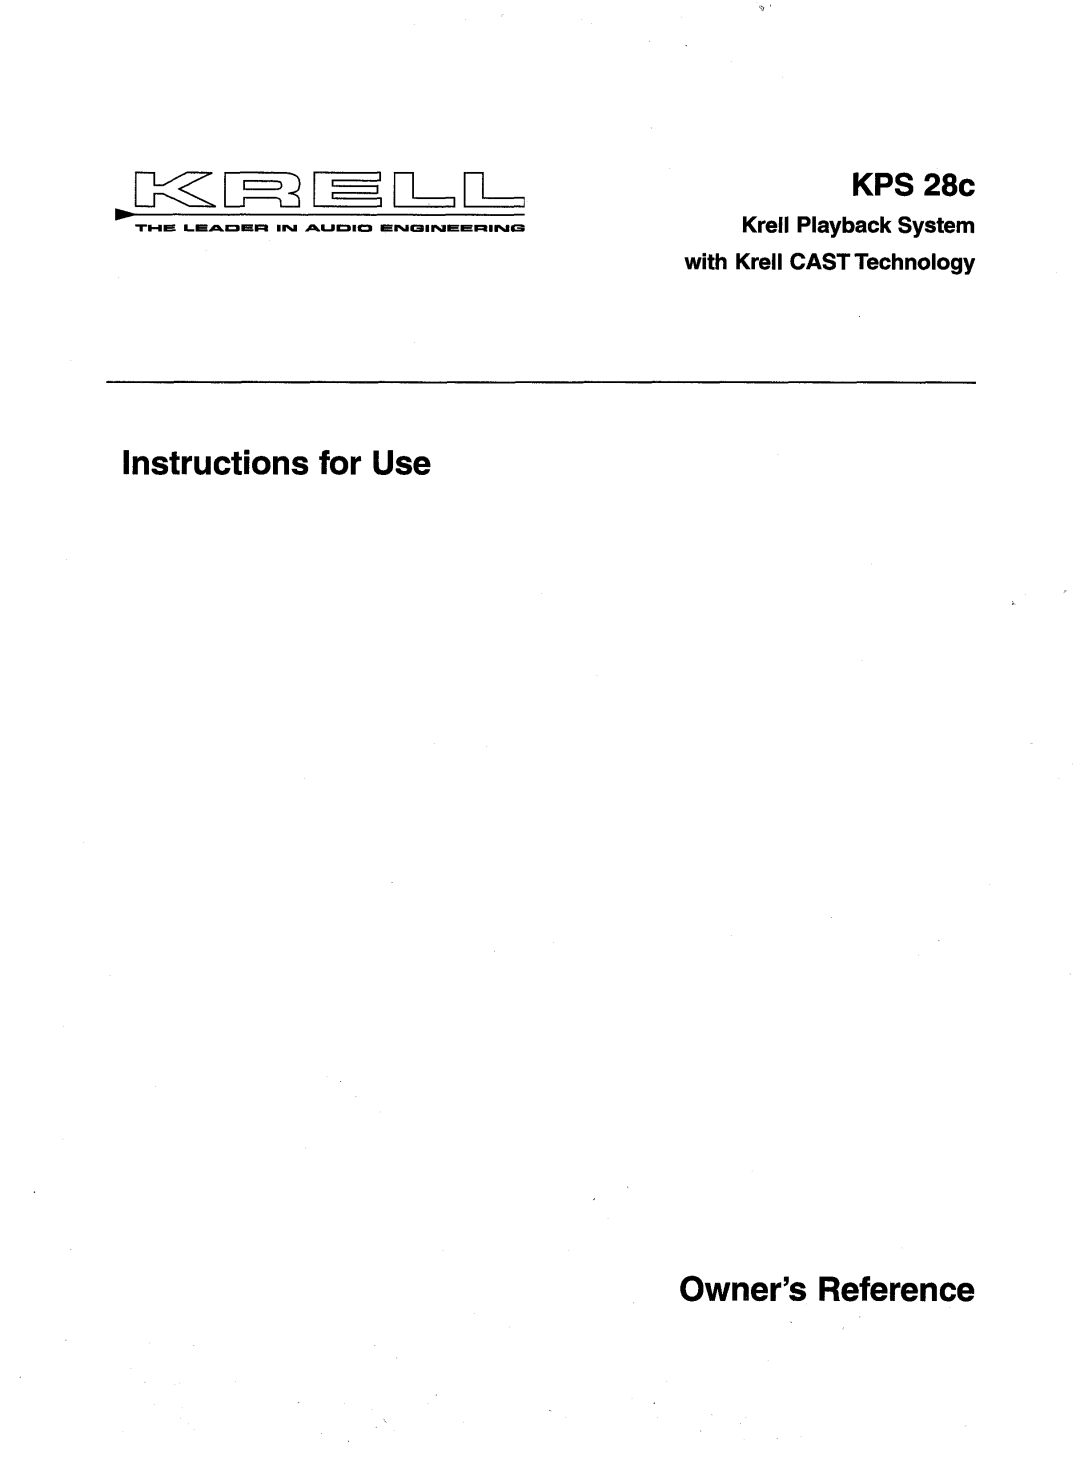 Krell Industries KPS 28c manual Instructions for Use, Owners Reference, Krell Playback System with Krell CASTTechnology 